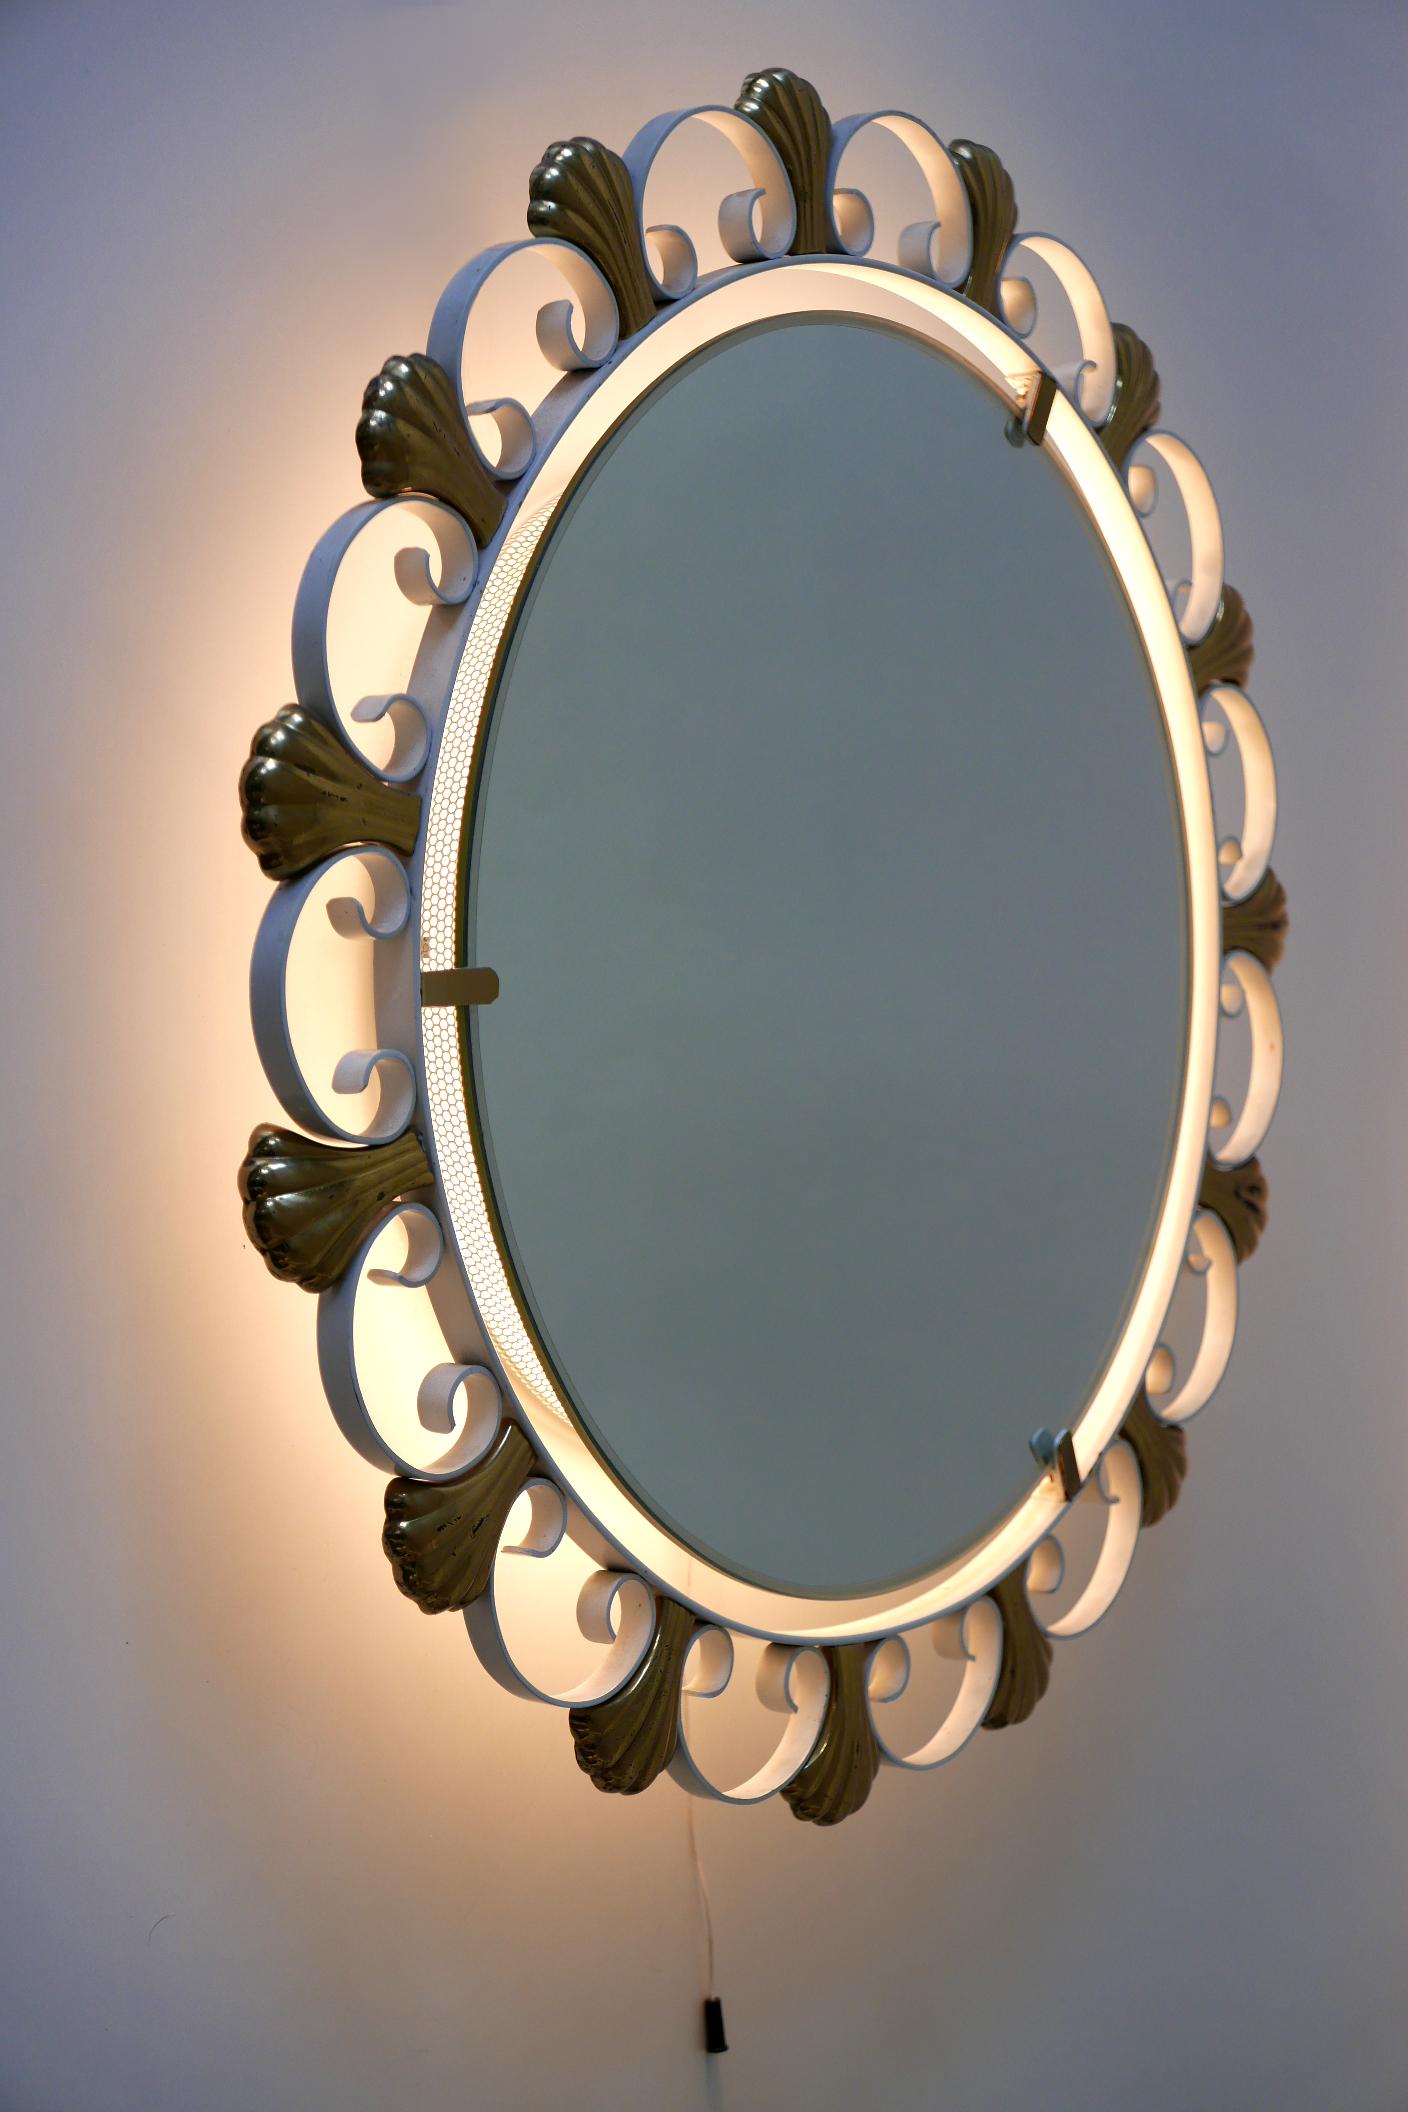 Elegant Mid-Century Modern Backlit Wall Mirror by Hillebrand, 1960s, Germany For Sale 6